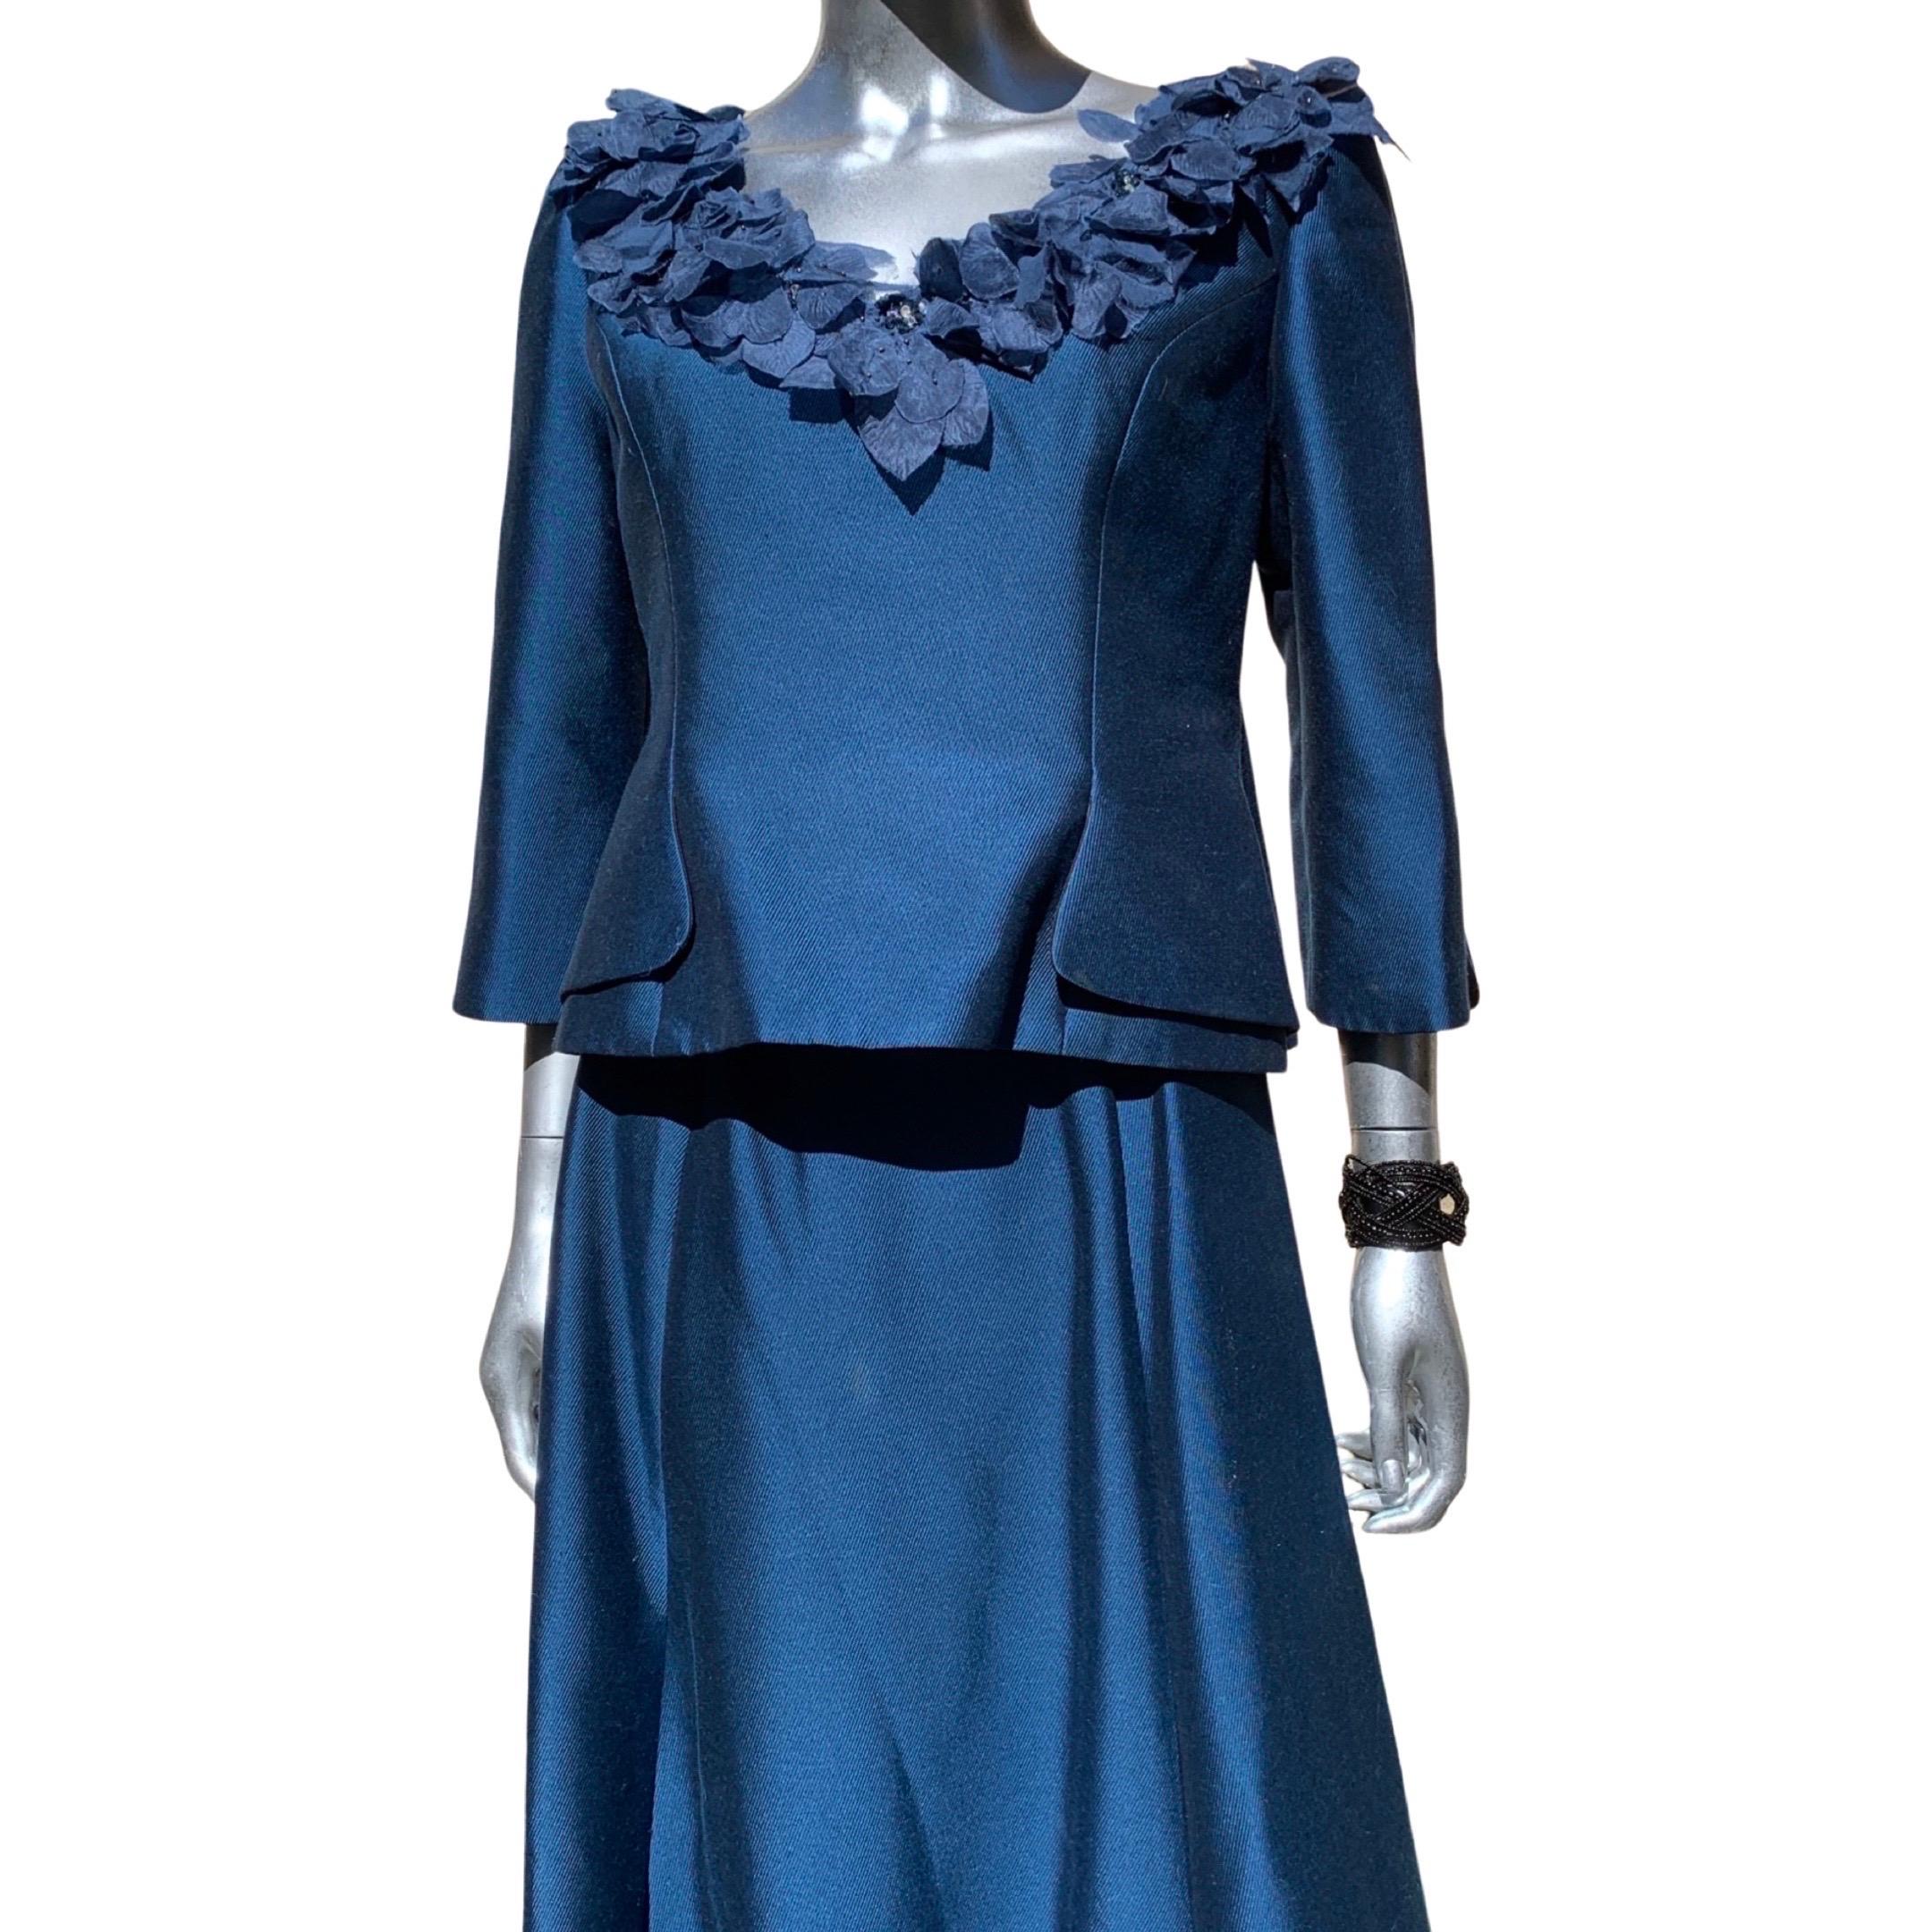 Three Piece Saphire Blue Couture Evening Ensemble by Lily Samii SF Size 8 For Sale 10